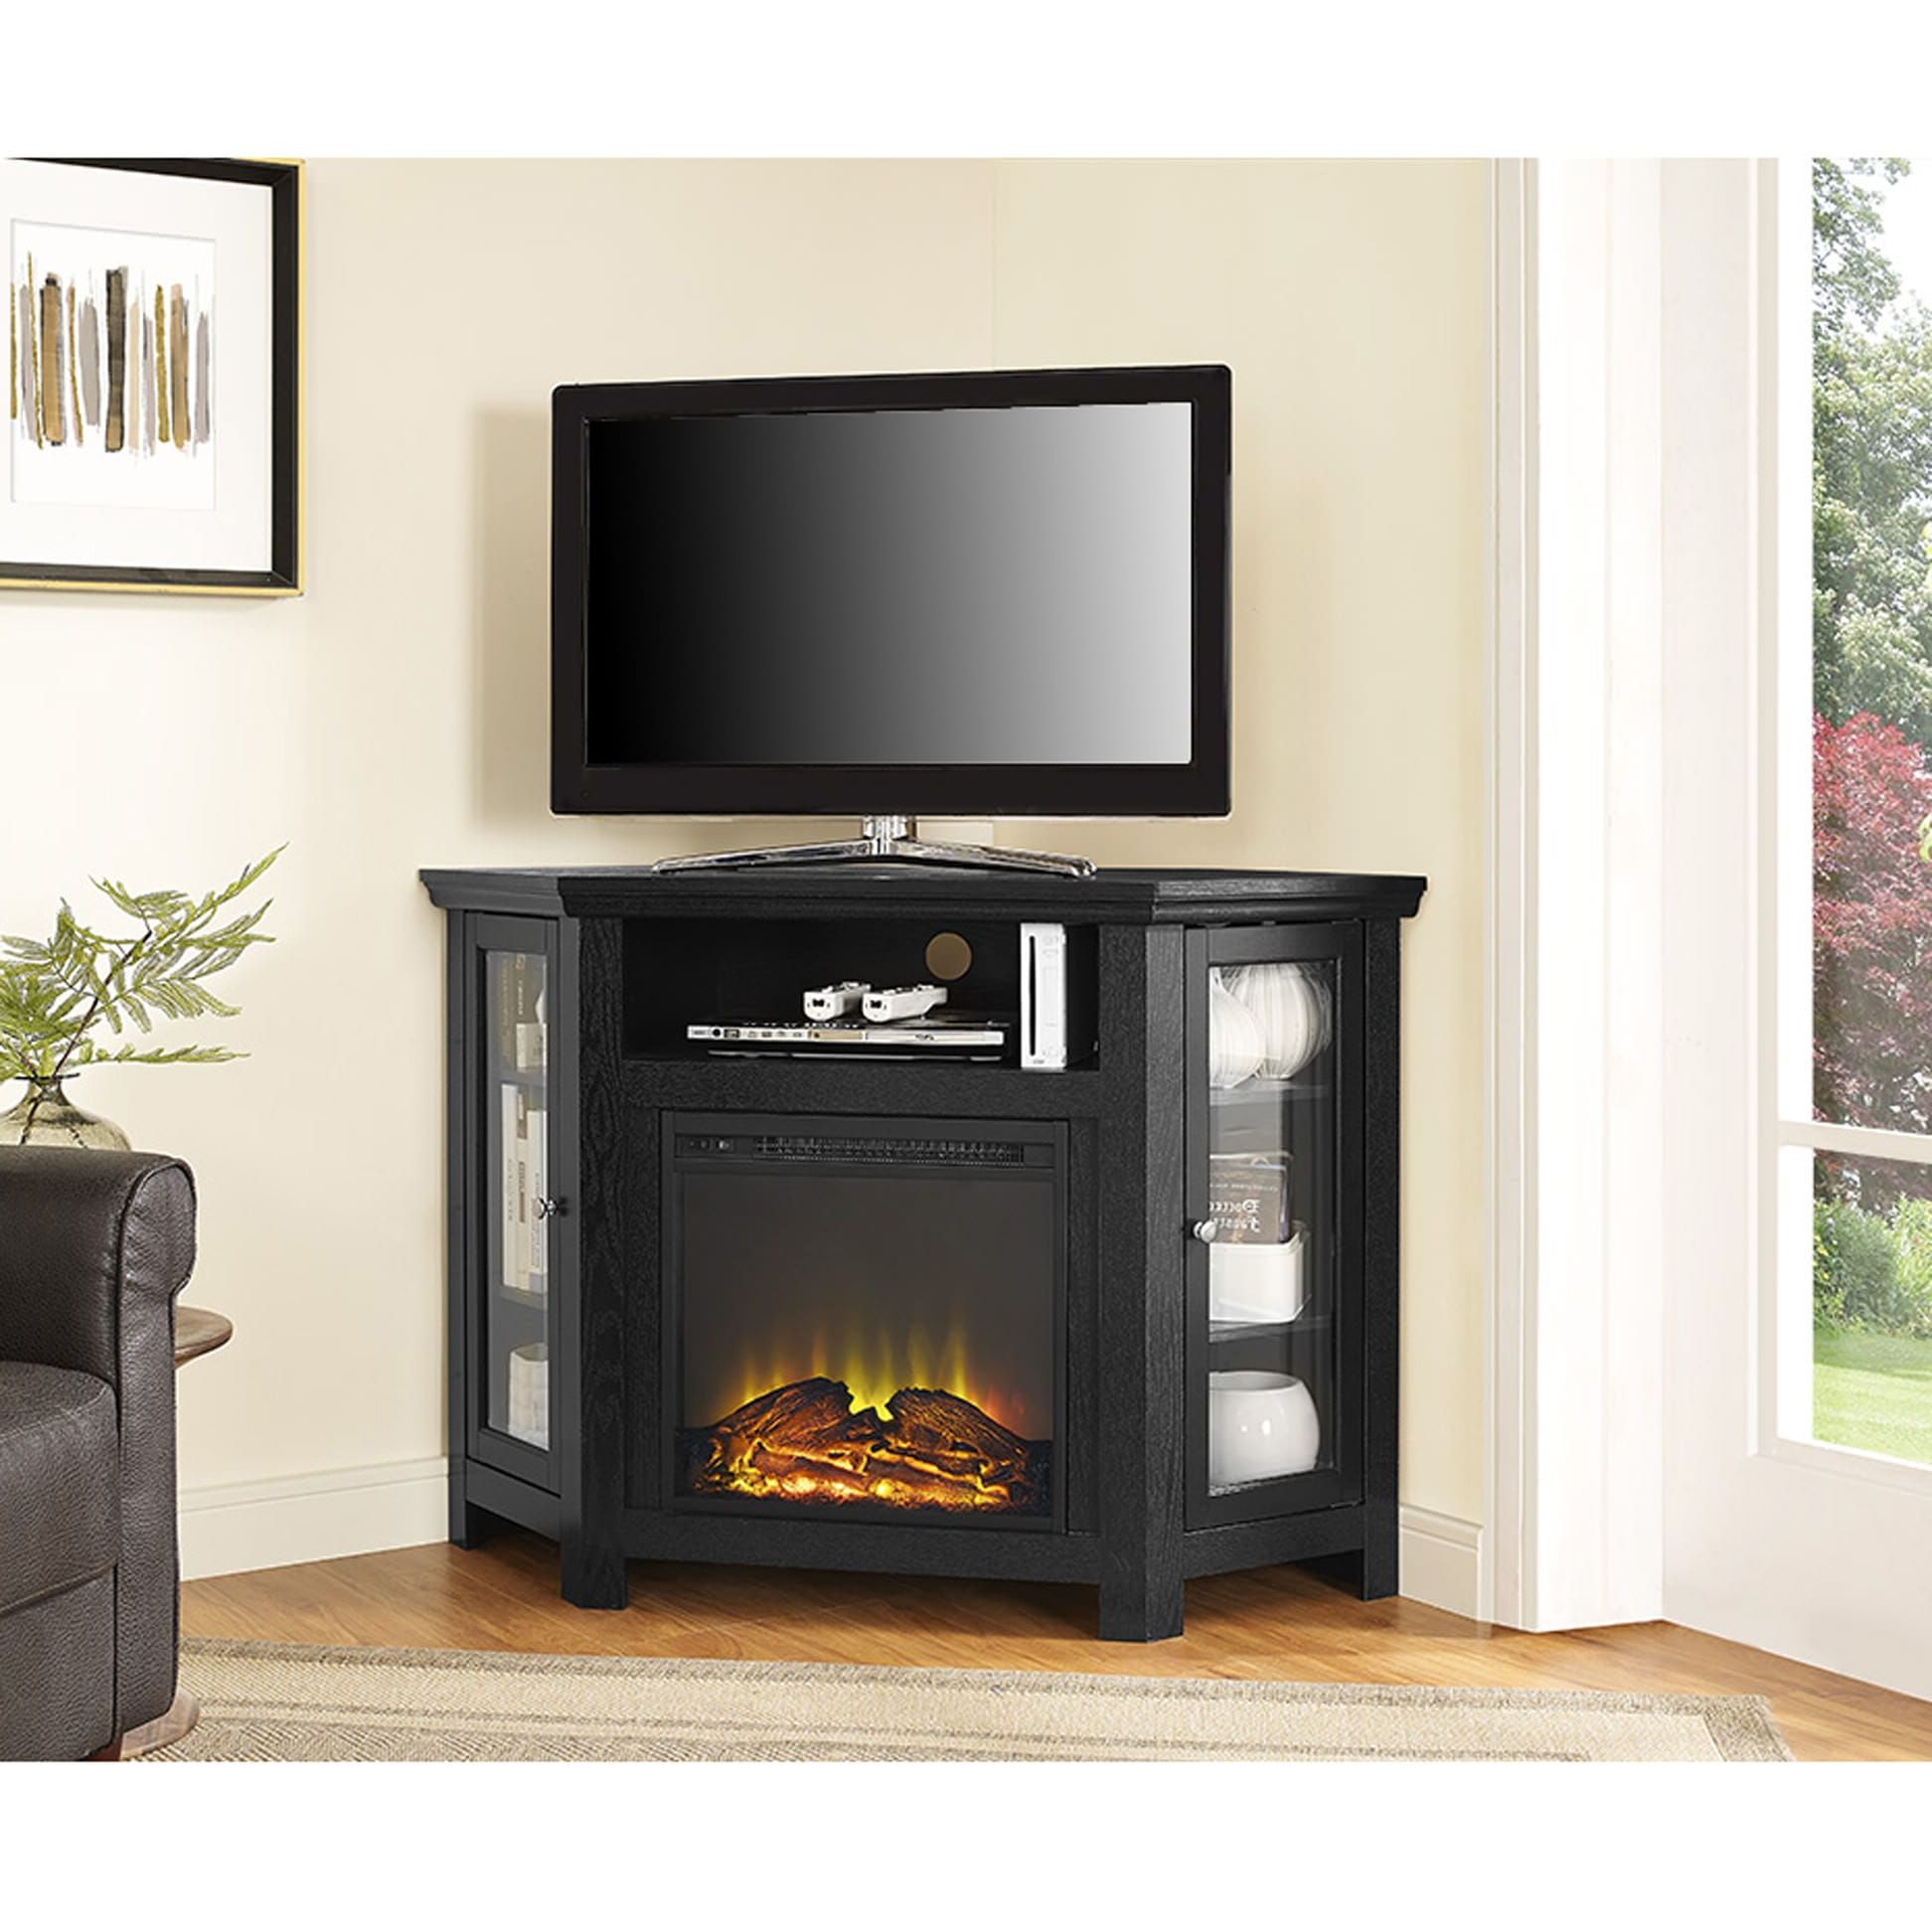 Most Recent Jackson 48 Inch Corner Fireplace Tv Stand – Black Intended For Corner Entertainment Tv Stands (View 10 of 10)